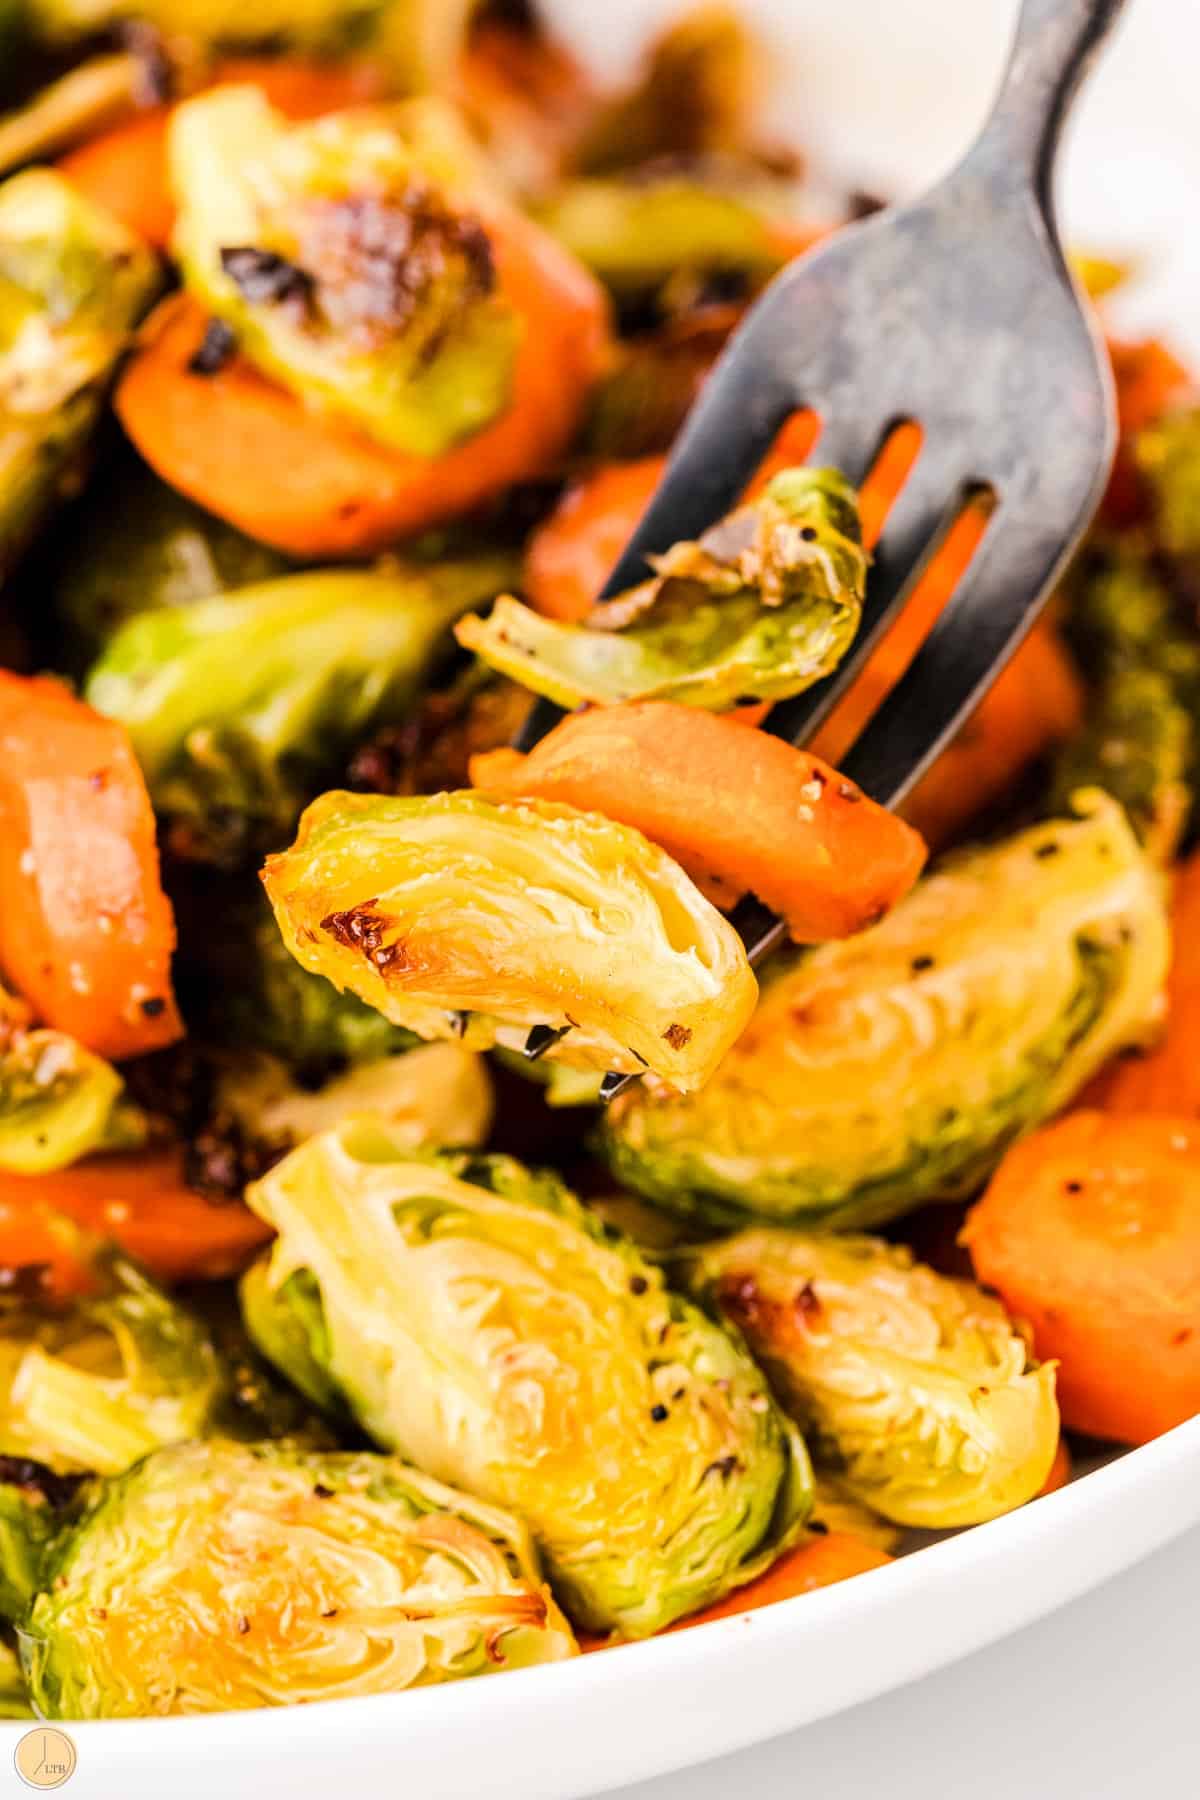 meal prep is easy with this sheet pan side dish of roasted vegetables